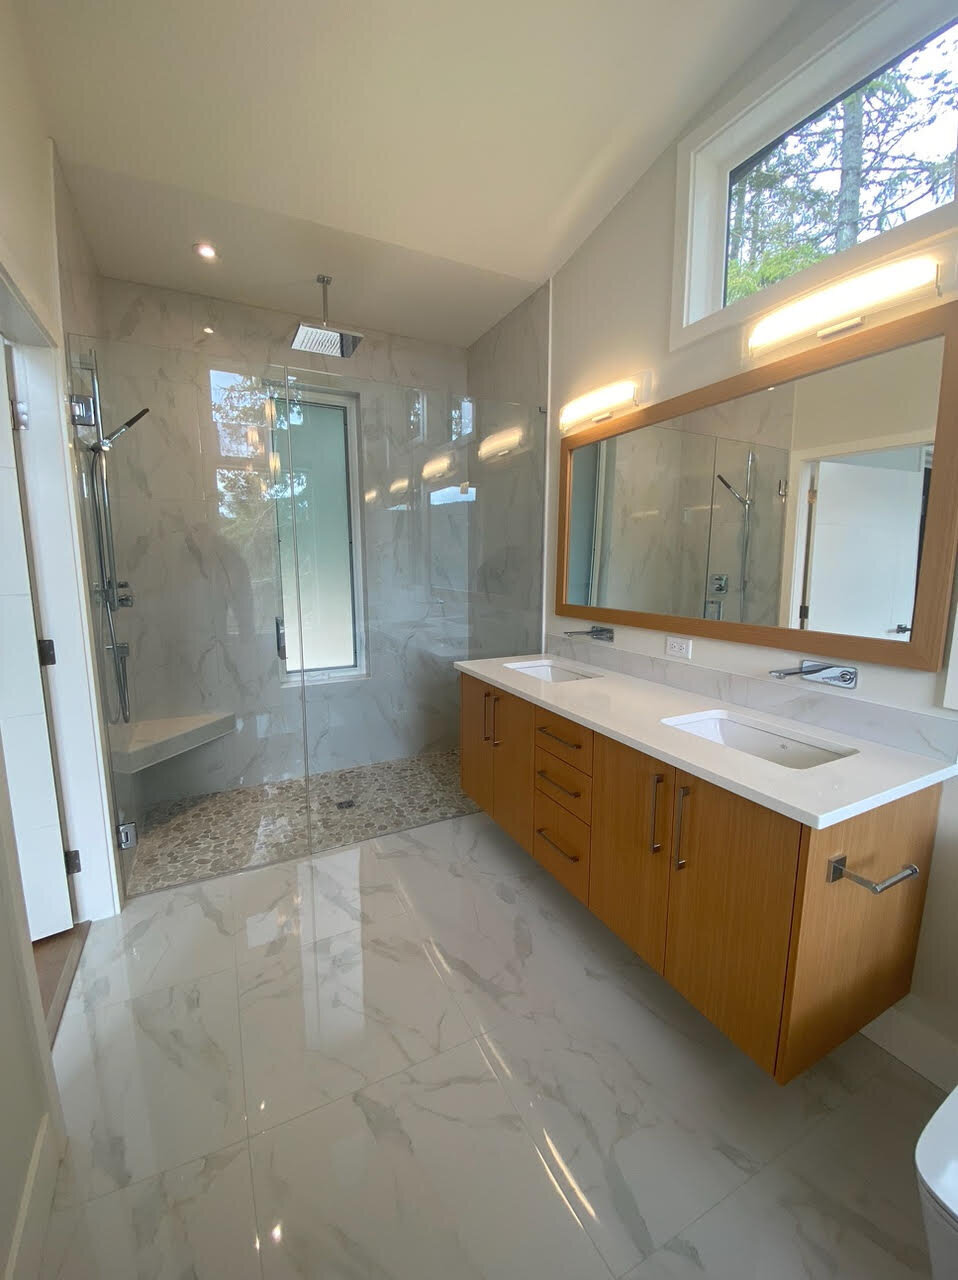 Bathroom interior design with walk in shower, pebble tile, rain shower, bench seat and double wood vanity with wall faucets